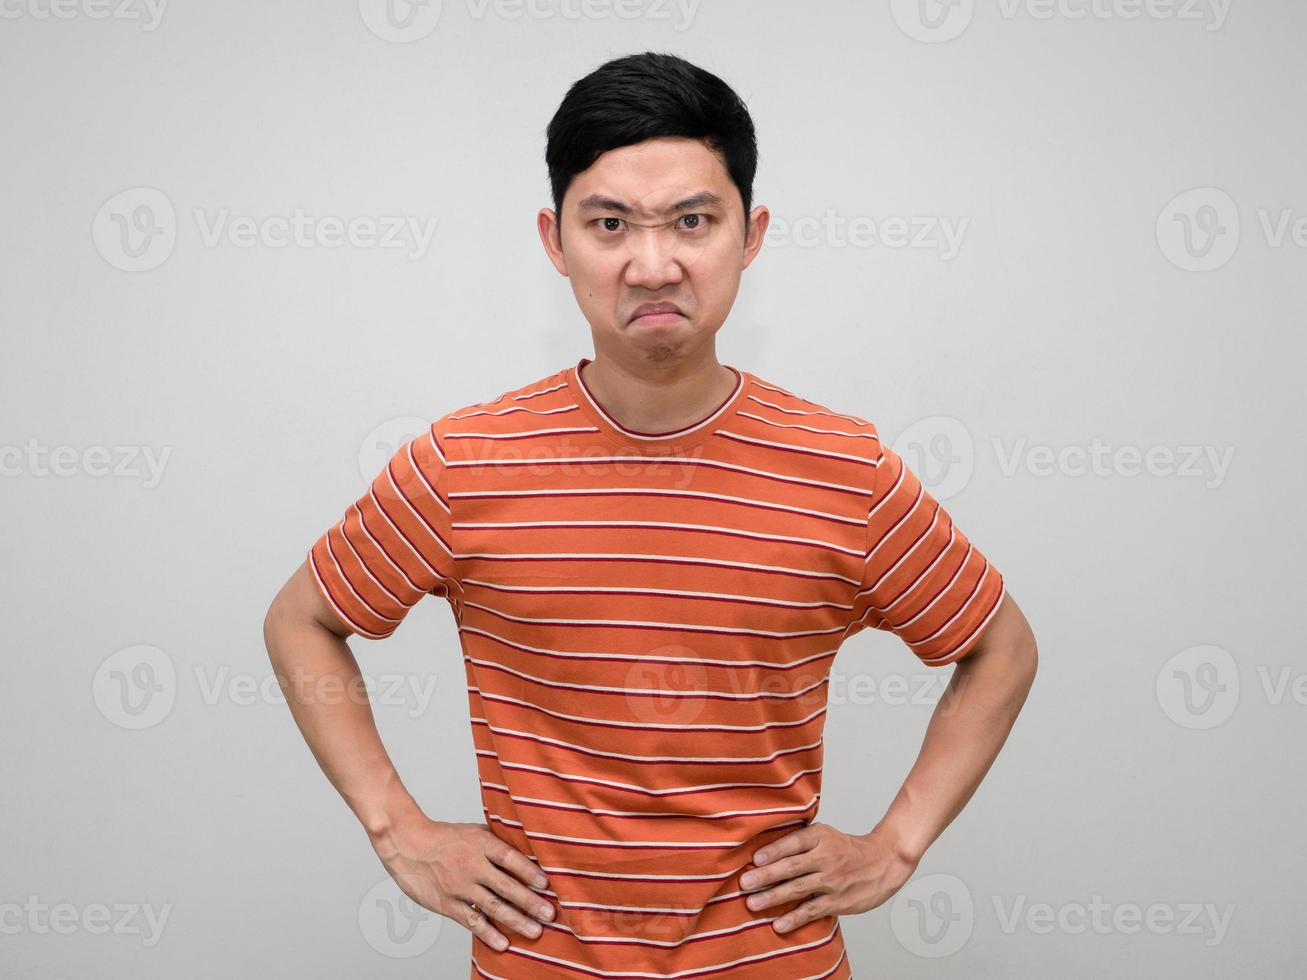 Asian man striped shirt stand hand at waist feels angry looking at you isolated photo